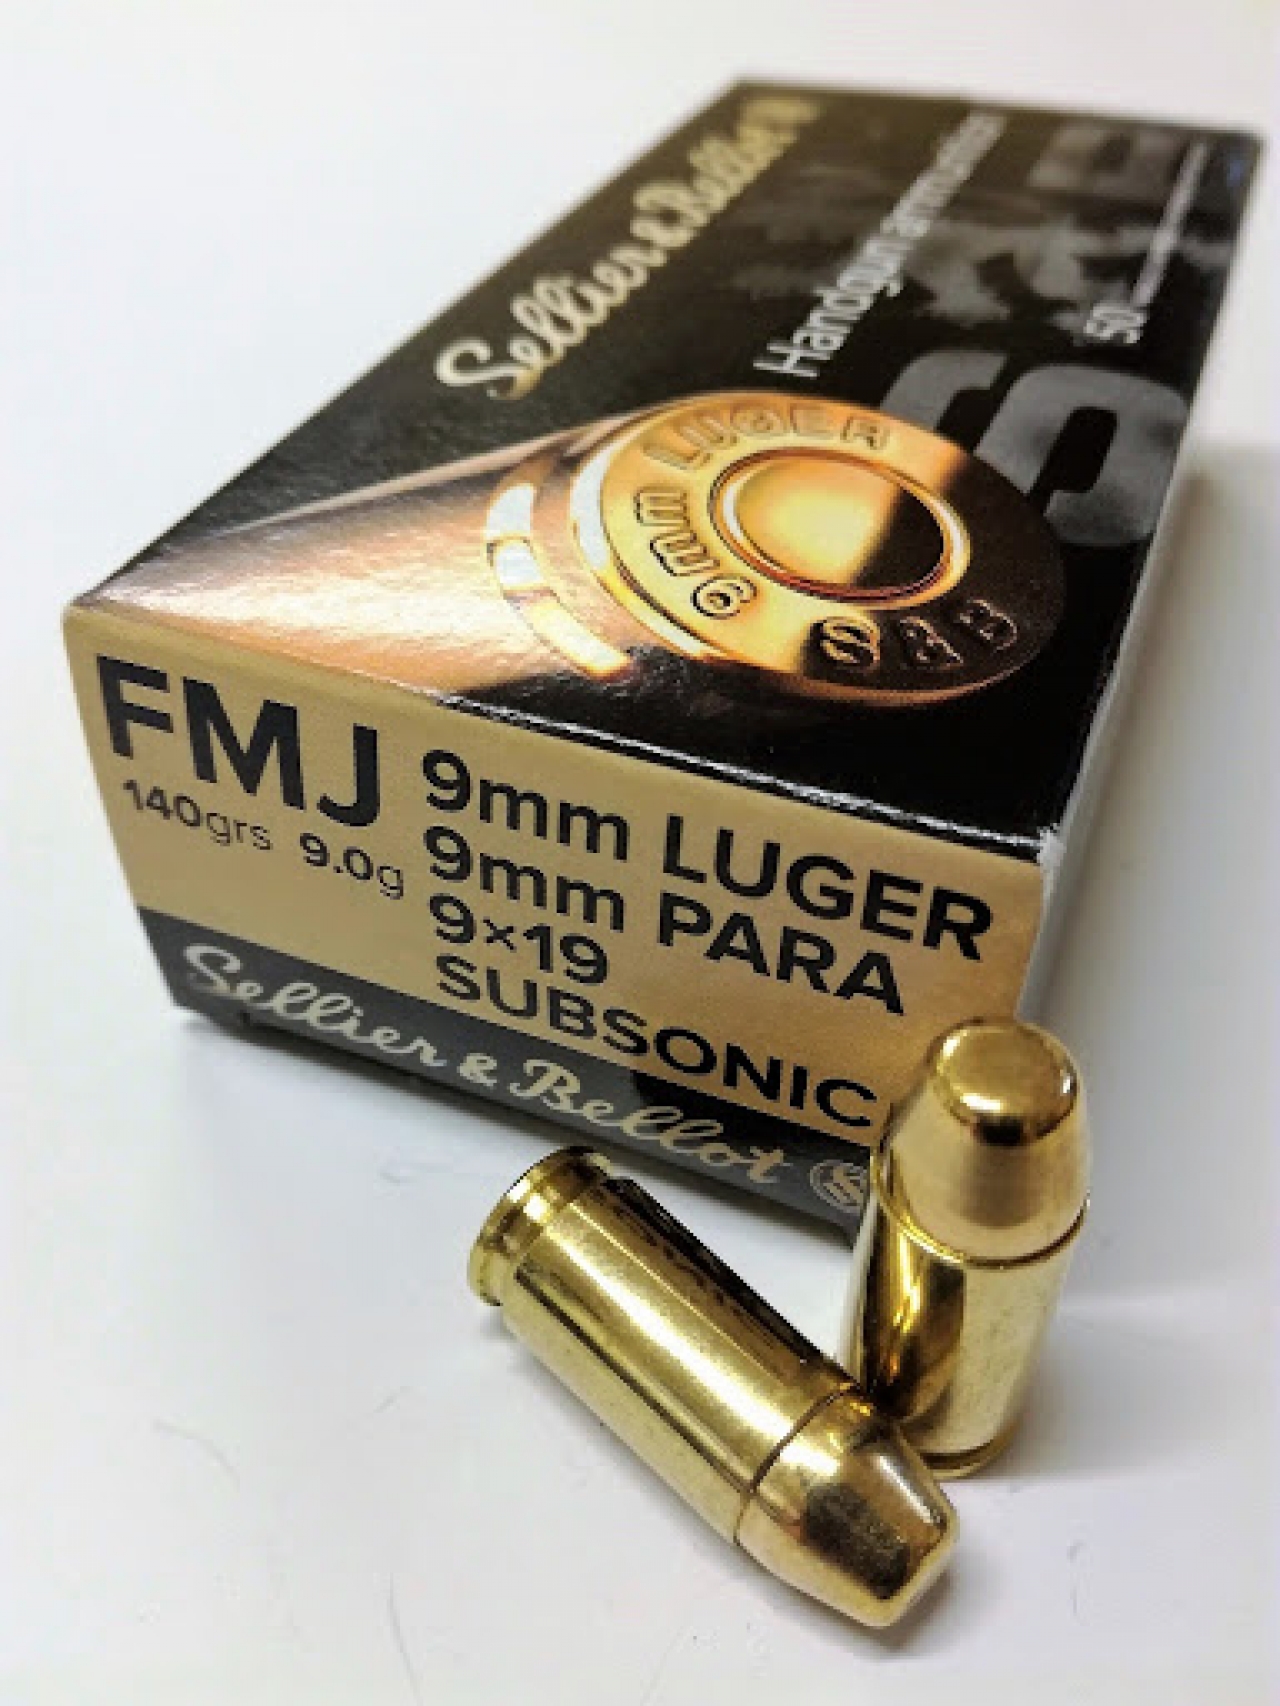 subsonic 9mm primers